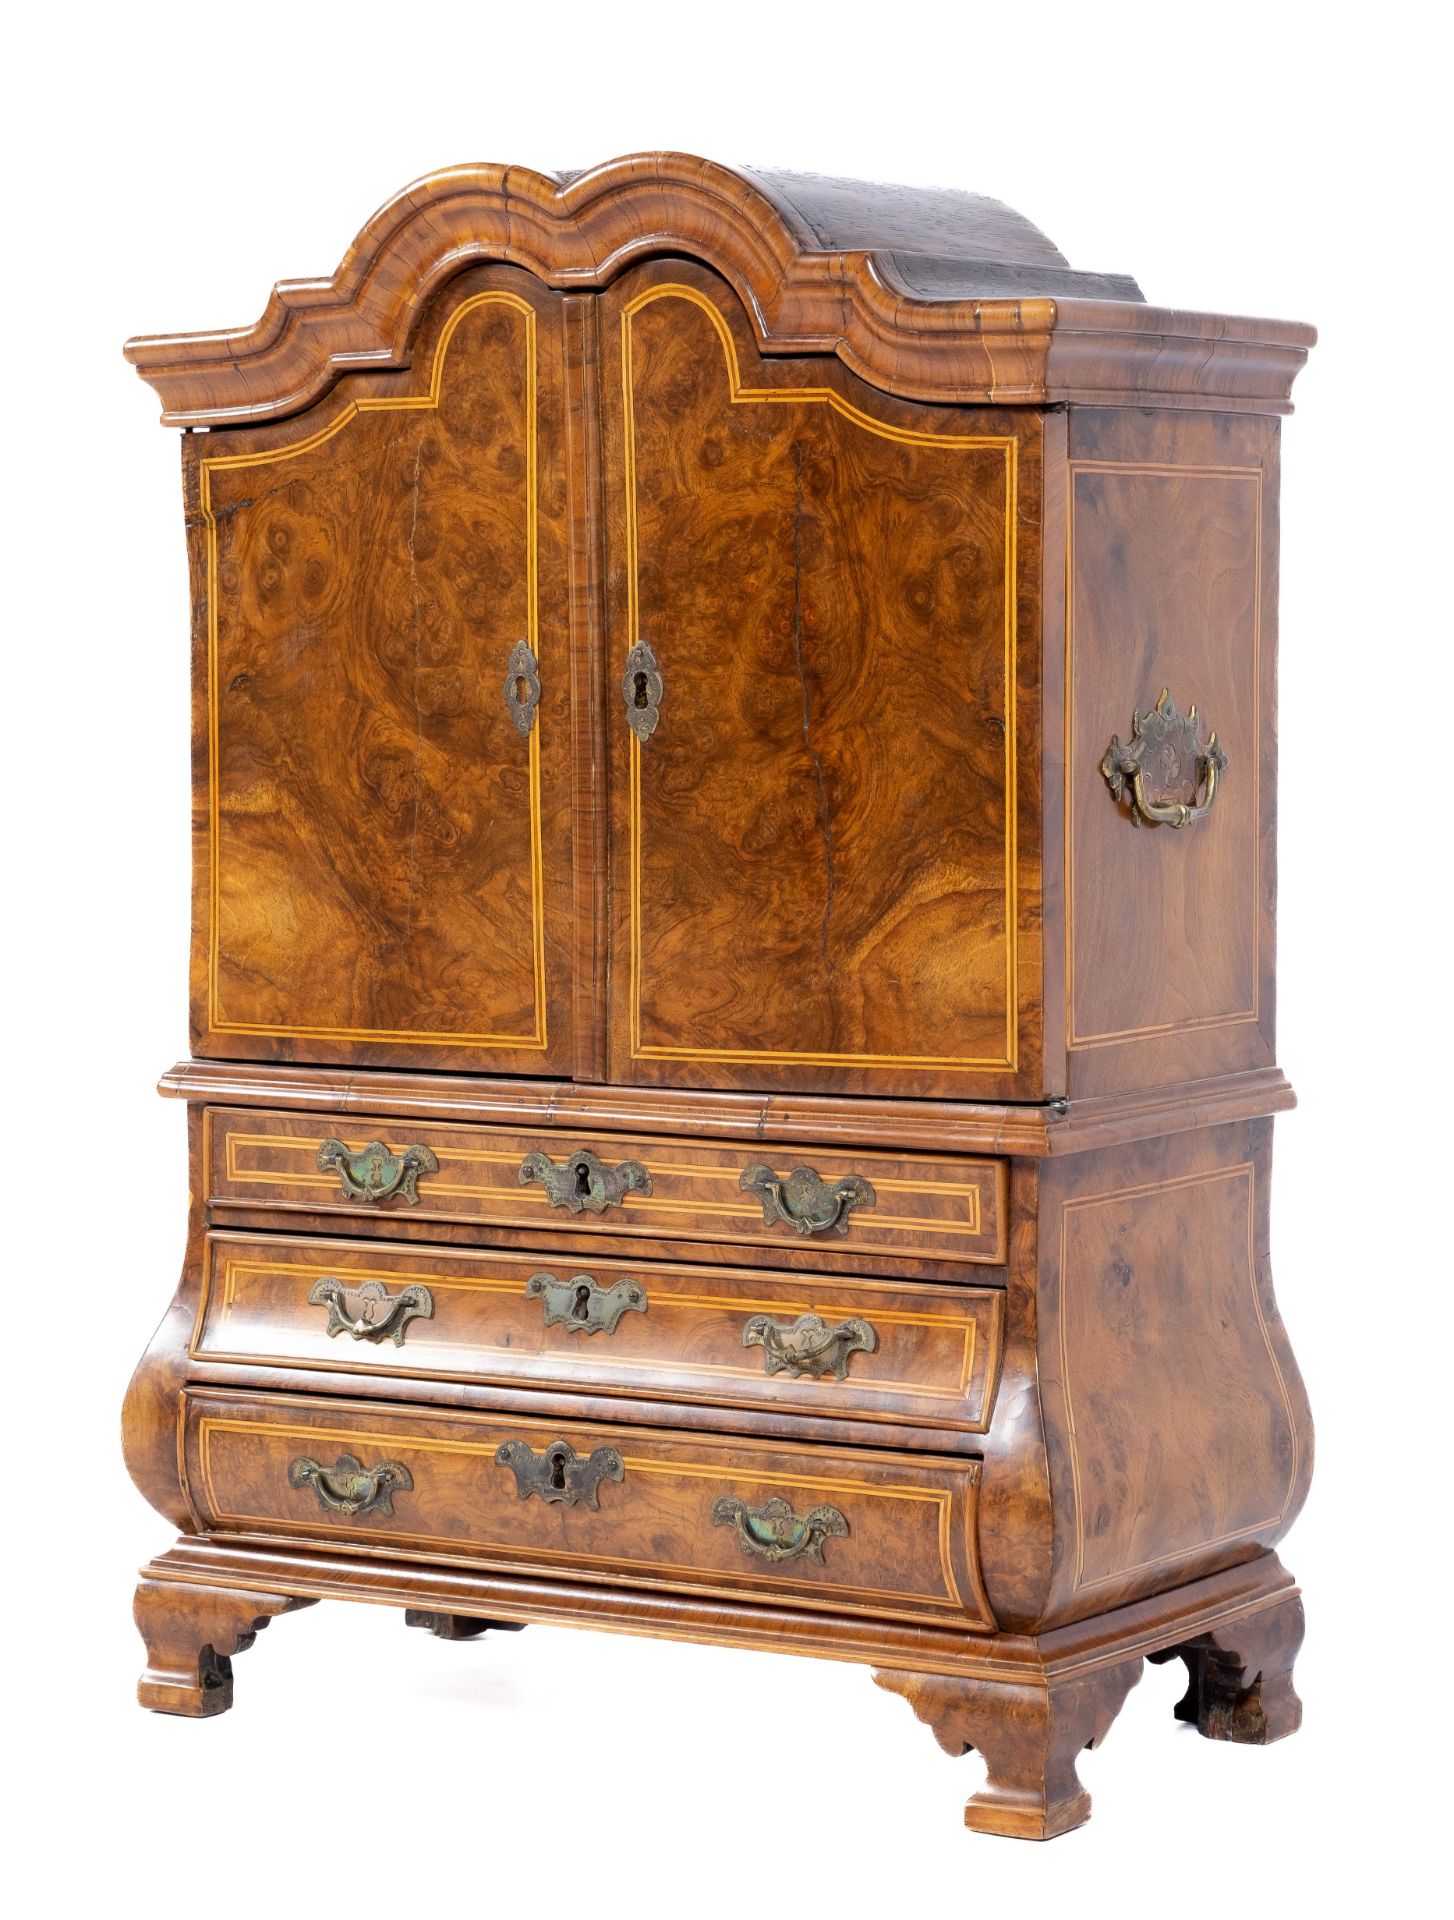 A Dutch burr-walnut and fruitwood miniature cabinet - Image 2 of 3